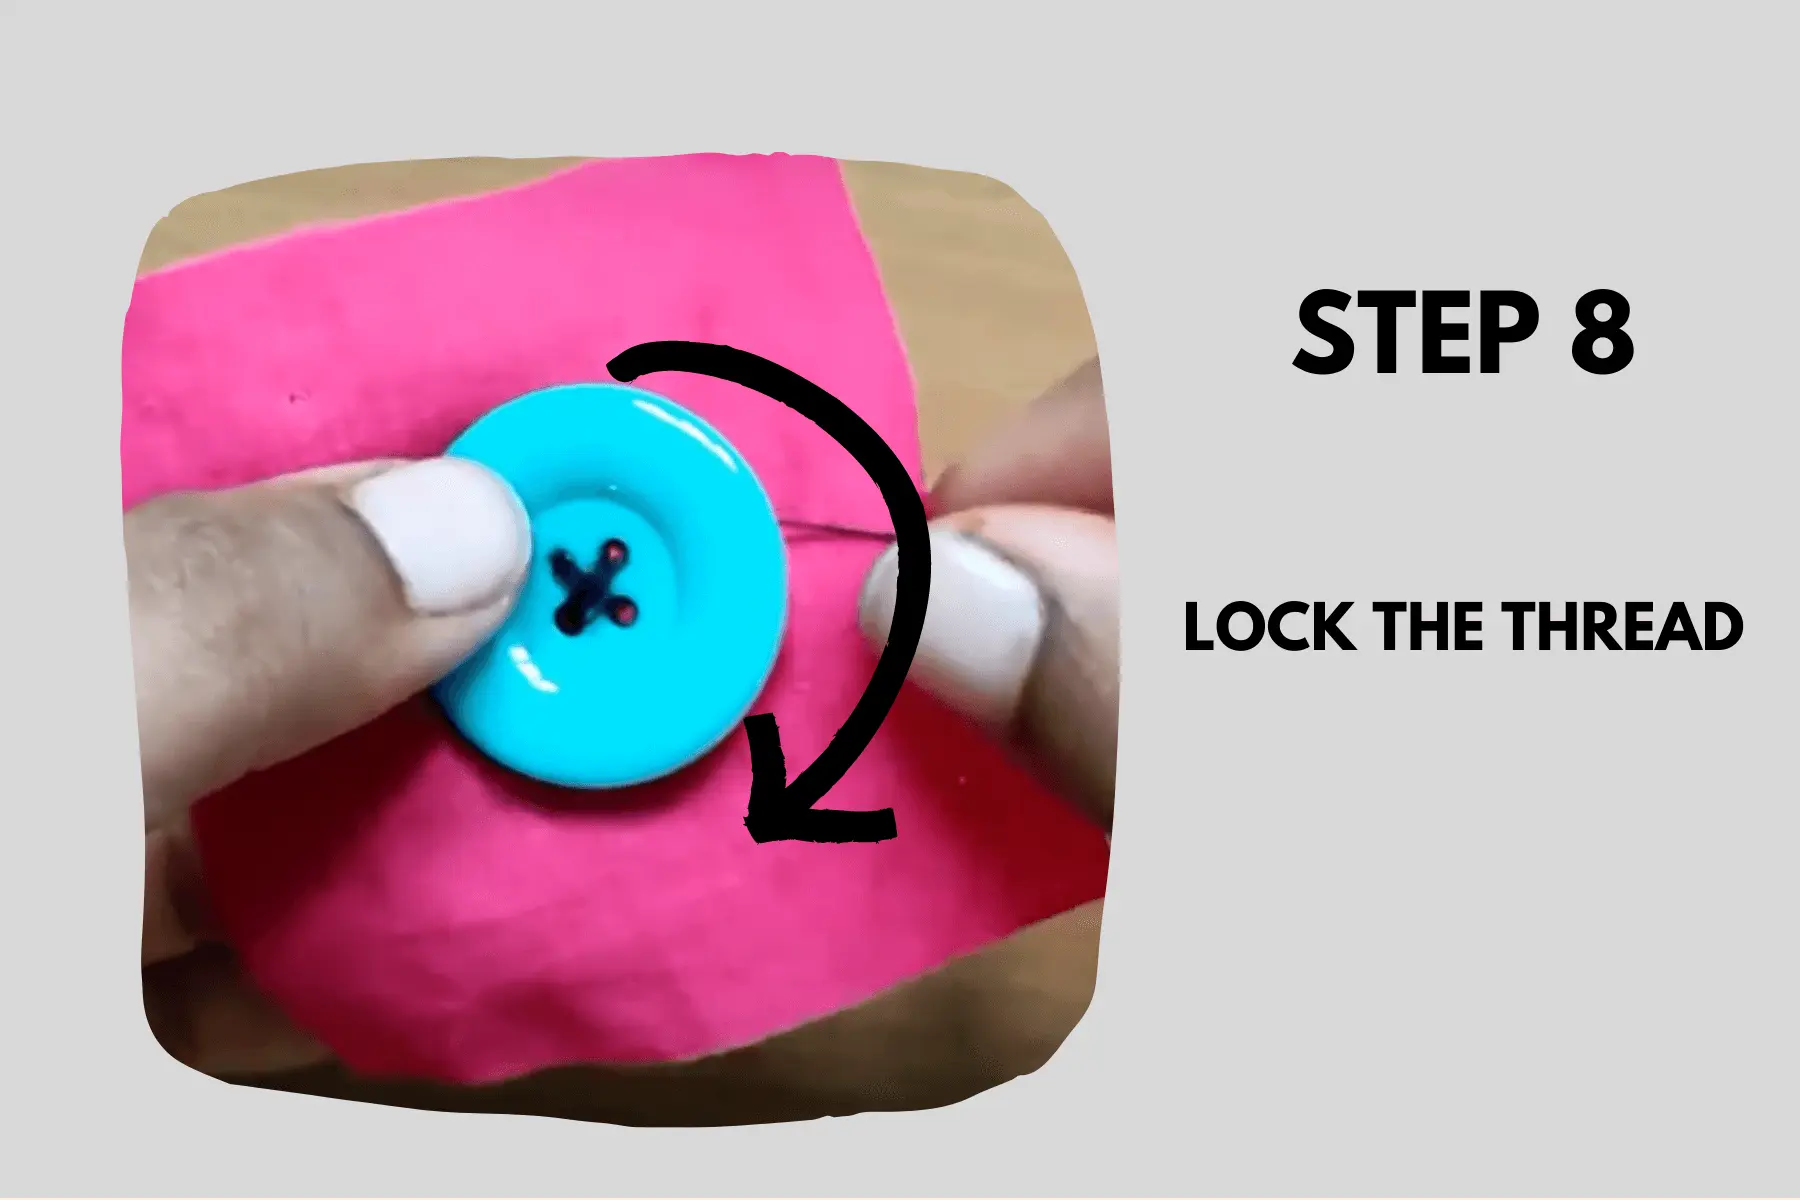 Locking the thread of four hole button